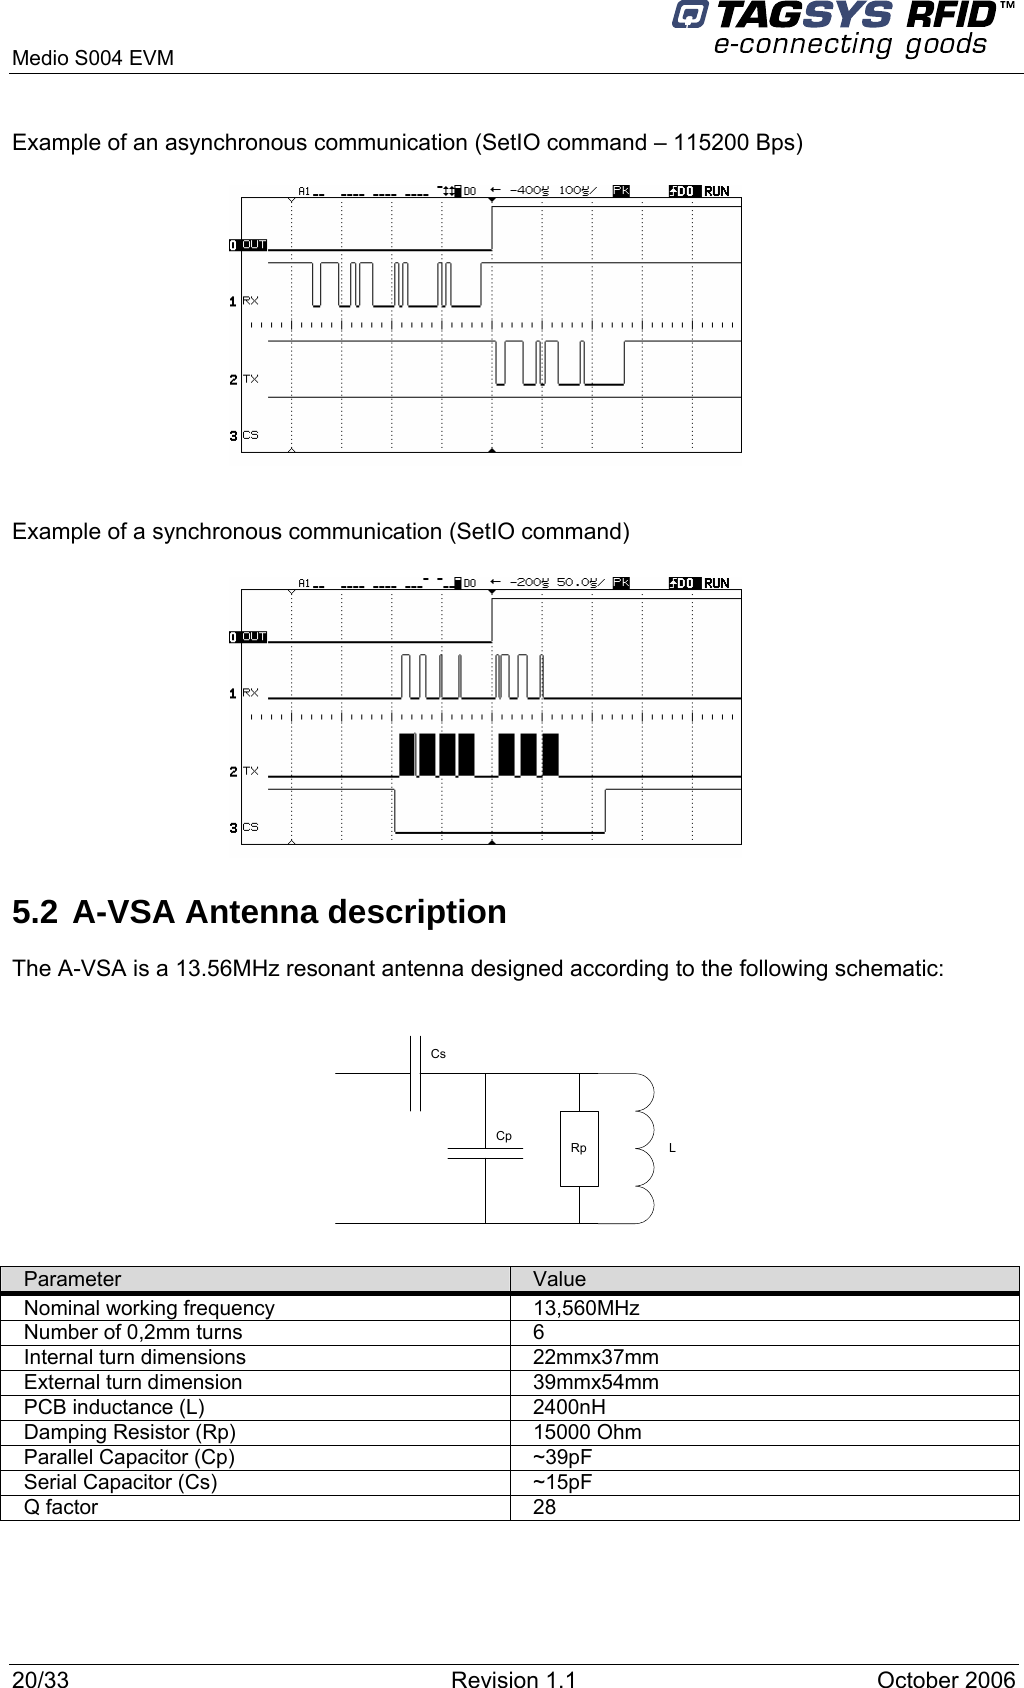   Medio S004 EVM Example of an asynchronous communication (SetIO command – 115200 Bps)          Example of a synchronous communication (SetIO command)         5.2 A-VSA Antenna description The A-VSA is a 13.56MHz resonant antenna designed according to the following schematic:  RpCpCsL  Parameter  Value Nominal working frequency  13,560MHz Number of 0,2mm turns  6 Internal turn dimensions  22mmx37mm External turn dimension  39mmx54mm PCB inductance (L)  2400nH Damping Resistor (Rp)  15000 Ohm Parallel Capacitor (Cp)  ~39pF Serial Capacitor (Cs)  ~15pF Q factor  28   20/33  Revision 1.1   October 2006 